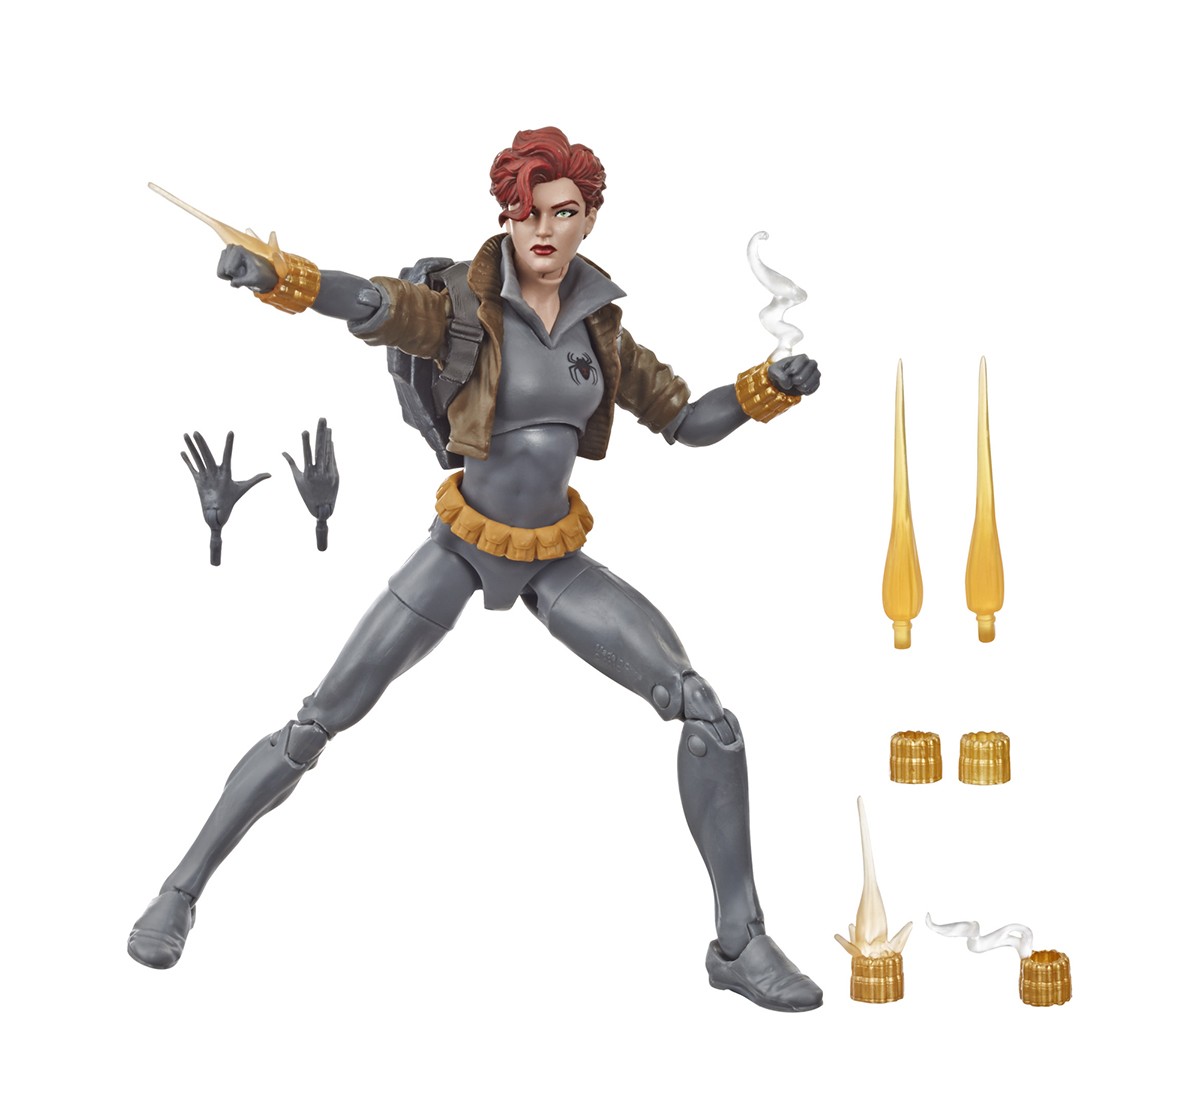 Hasbro Marvel Legends Series Walmart Exclusive 6-inch Collectible Black Widow Action Figure Toy, Premium Design, Accessories, Ages 4 And Up 